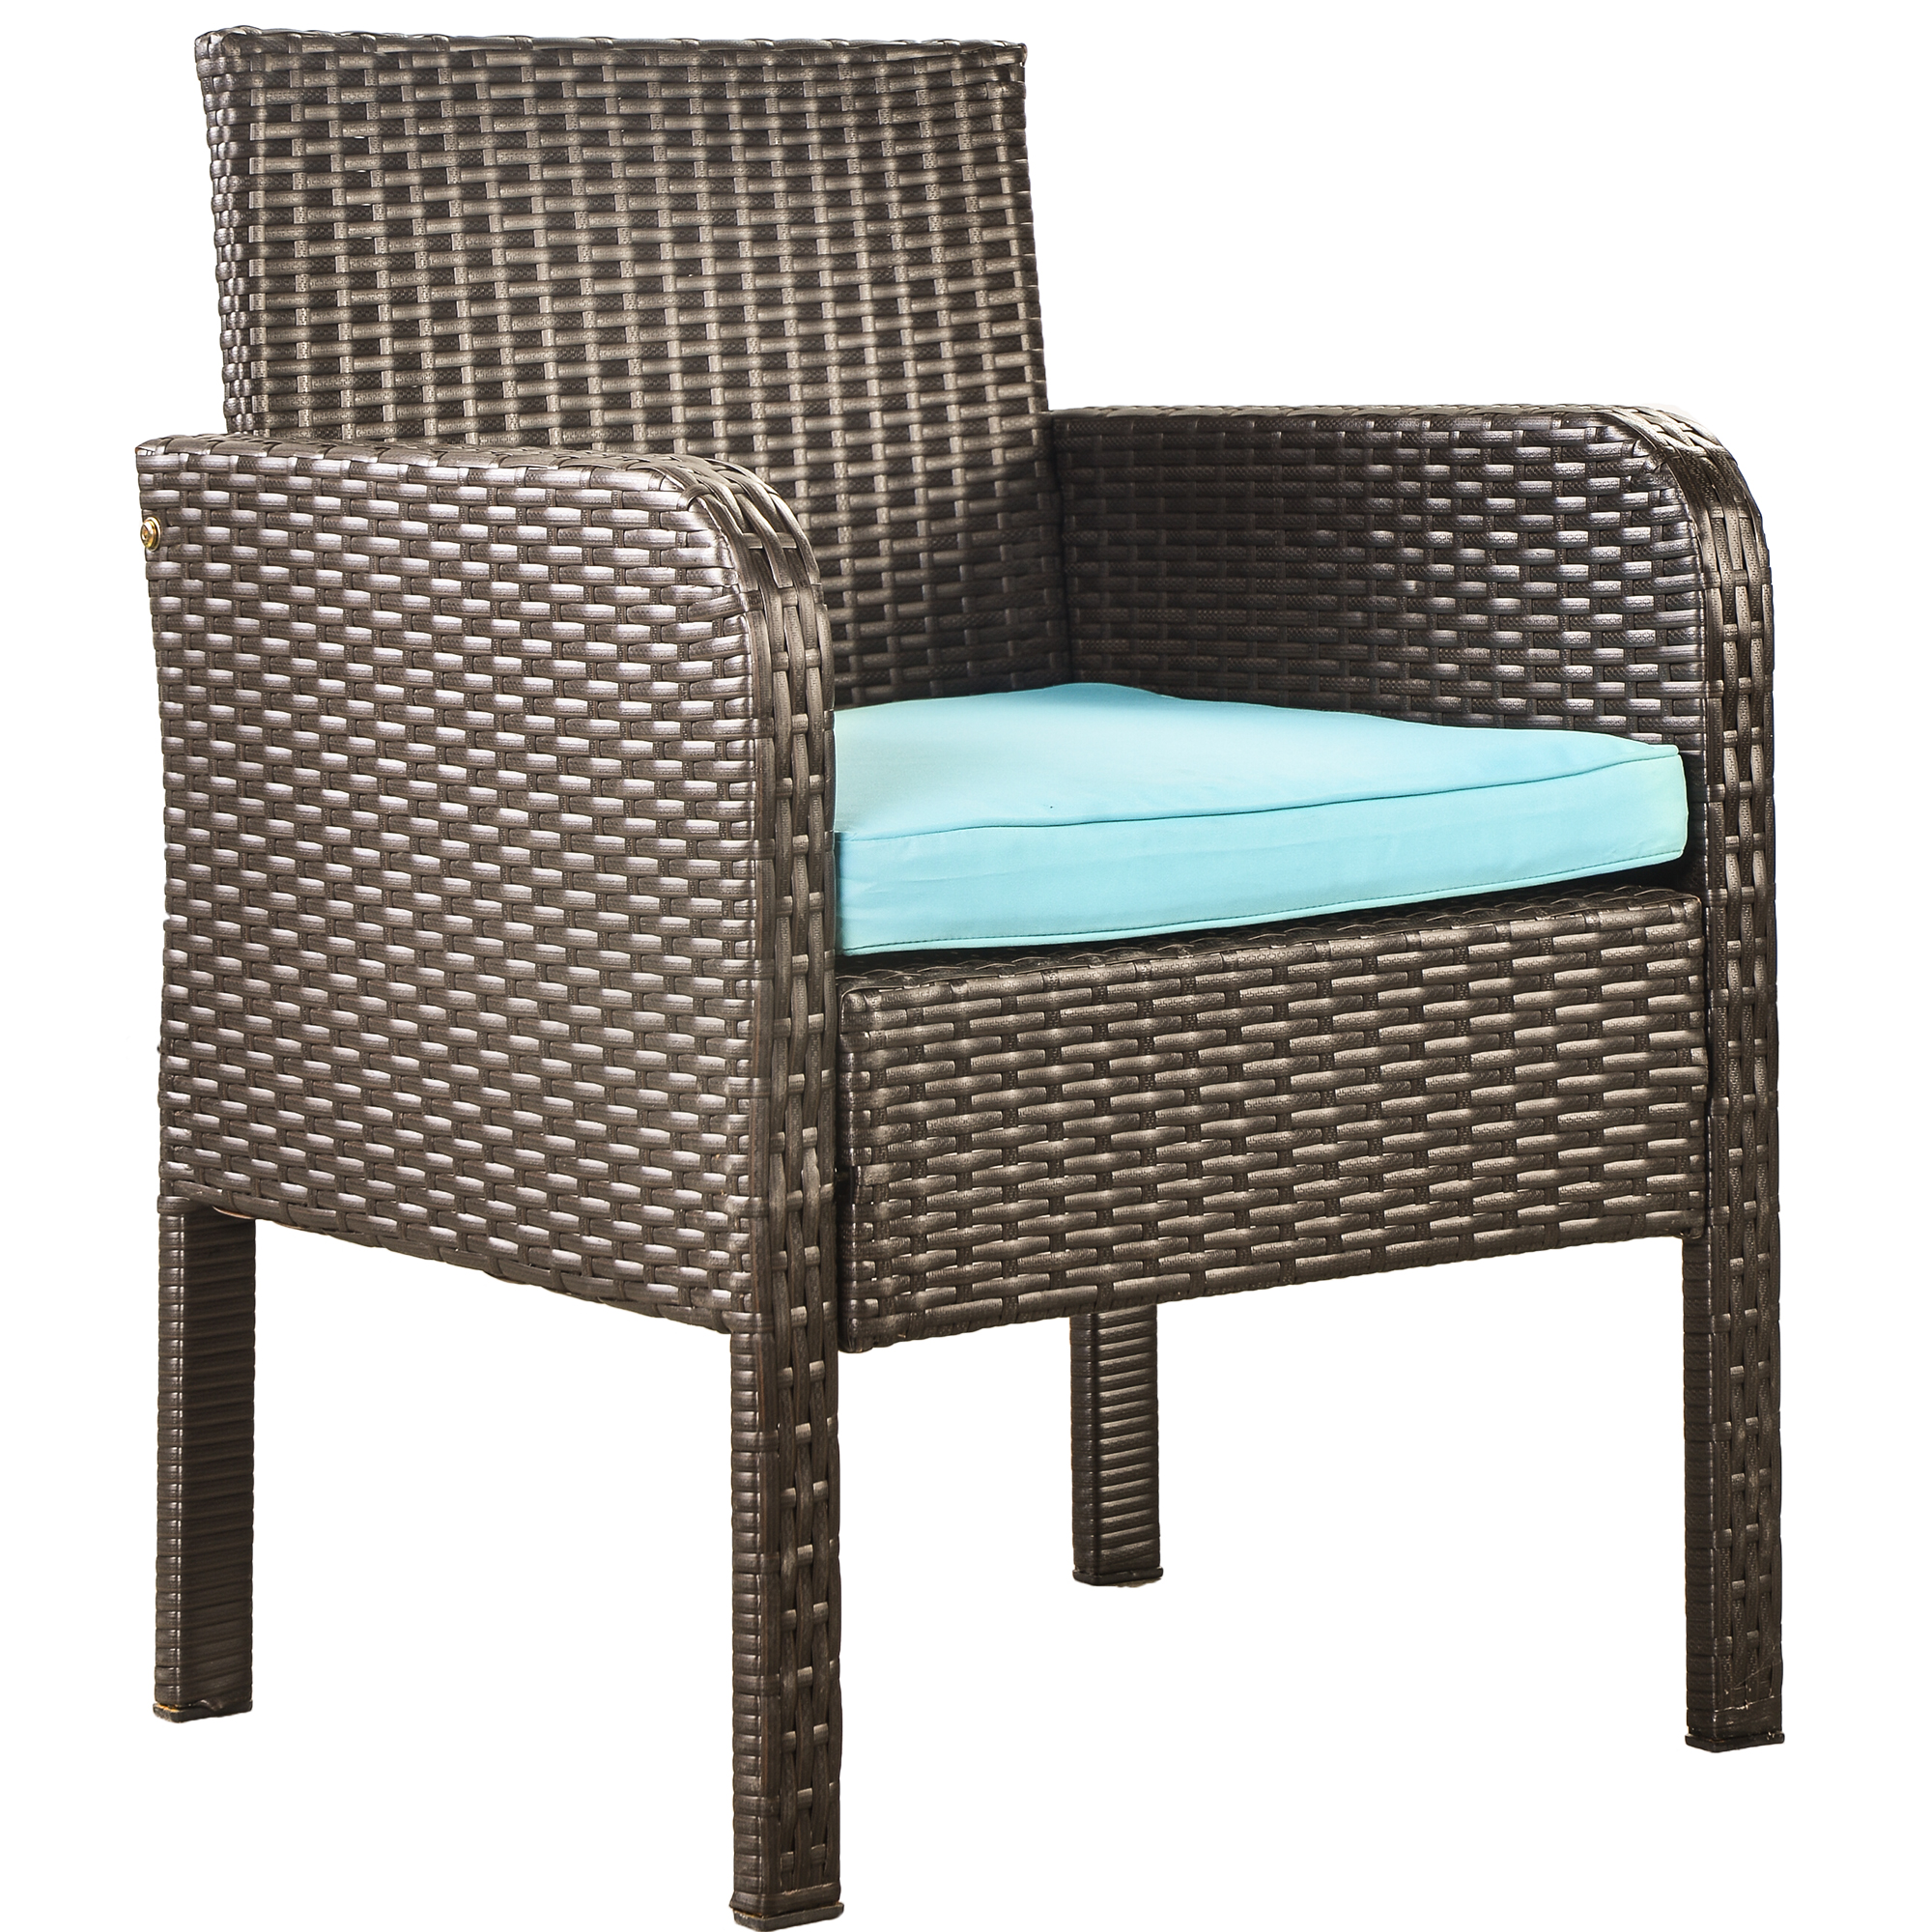 4 Piece Outdoor Patio Furniture Set, PE Rattan Wicker Sofa Set, Outdoor Sectional Furniture Chair Set with Cushions and Tea Table, Wicker Conversation Set for Backyard Lawn Porch Garden Poolside, B298 - image 5 of 7